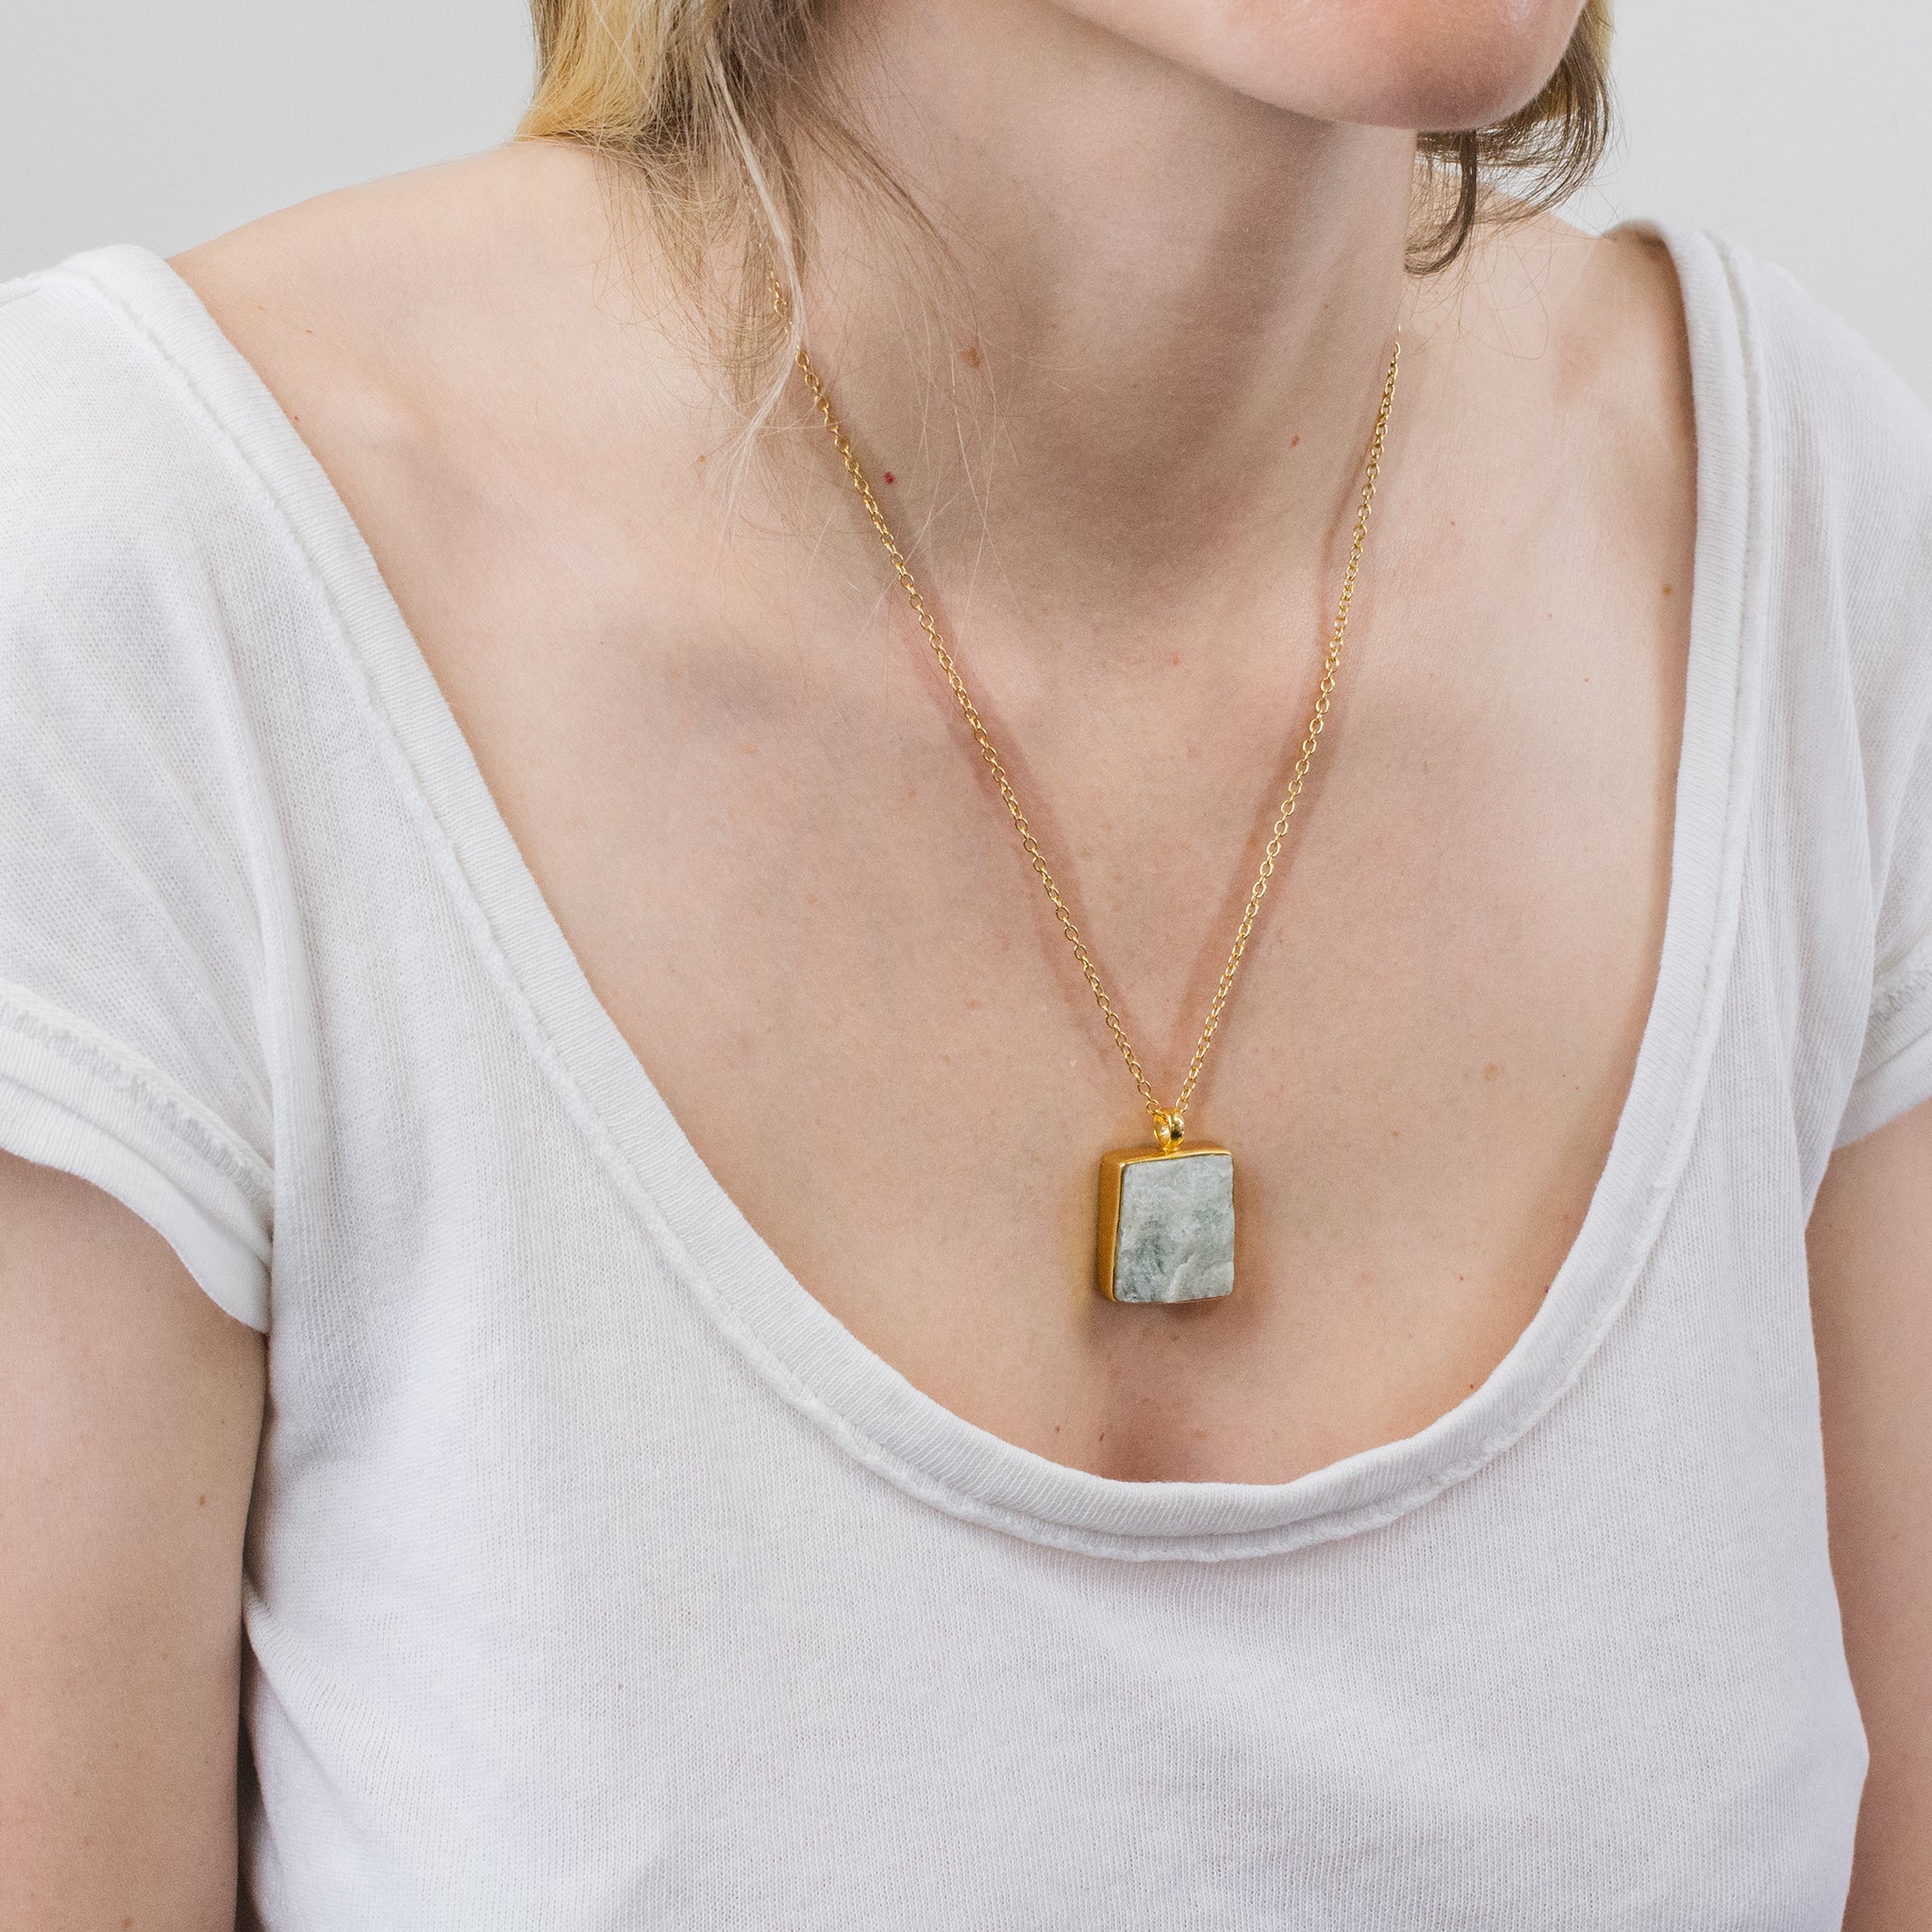 RAW AQUAMARINE NECKLACE WITH GOLD VERMEIL FINISH ON MODEL 